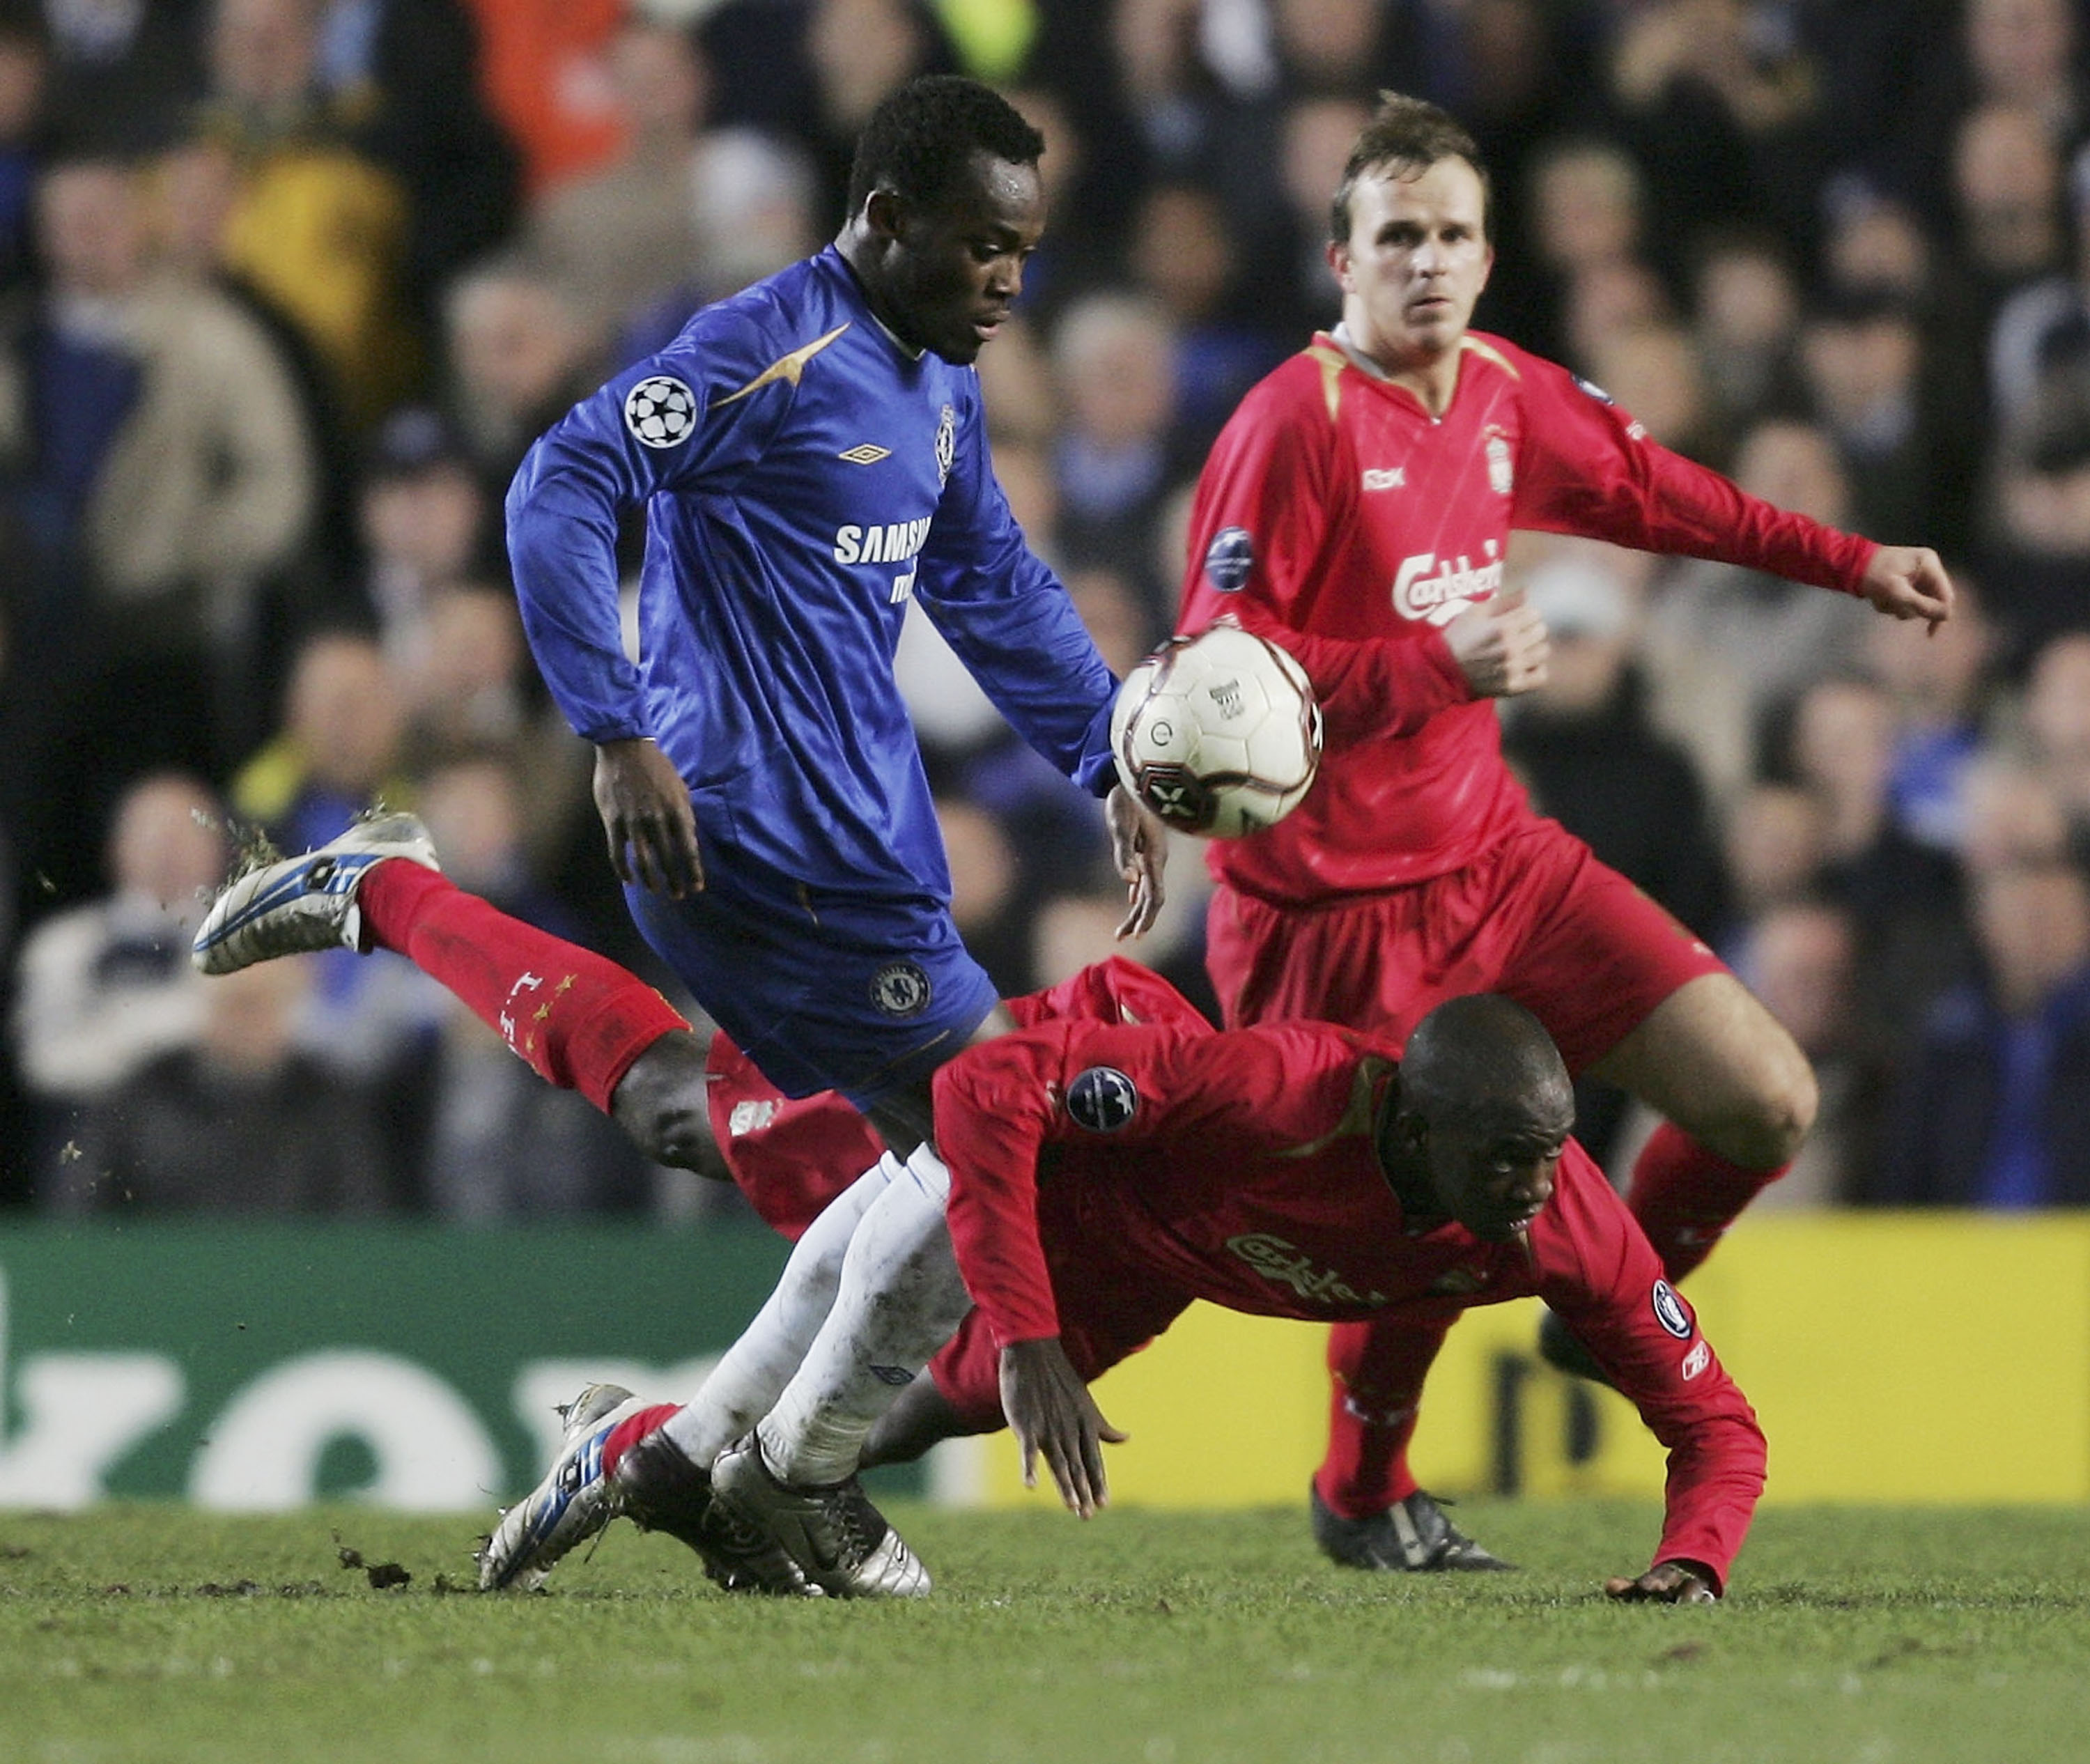 LONDON - DECEMBER 06:  Mickael Essien of Chelsea battles Mohamed Sissoko of Liverpool during the UEFA Champions League Group G match between Chelsea and Liverpool at Stamford Bridge on December 6, 2005 in London, England.  (Photo by Shaun Botterill/Getty